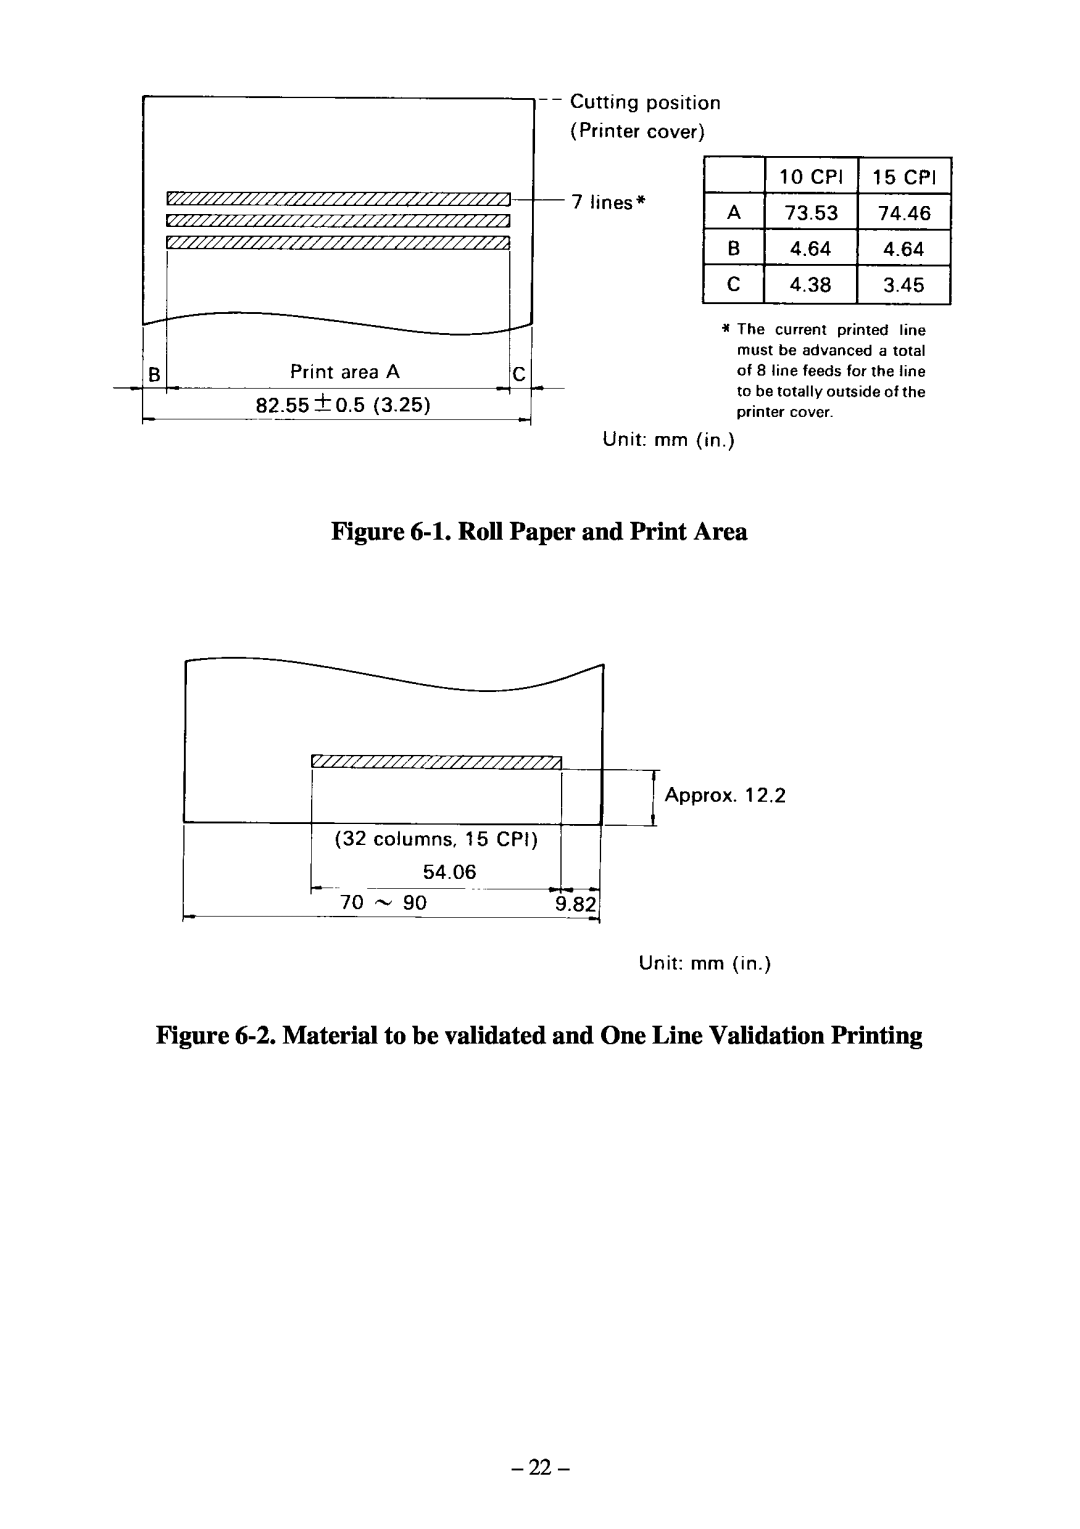 Star Micronics DP8340RC 1. Roll Paper and Print Area, 2. Material to be validated and One Line Validation Printing 